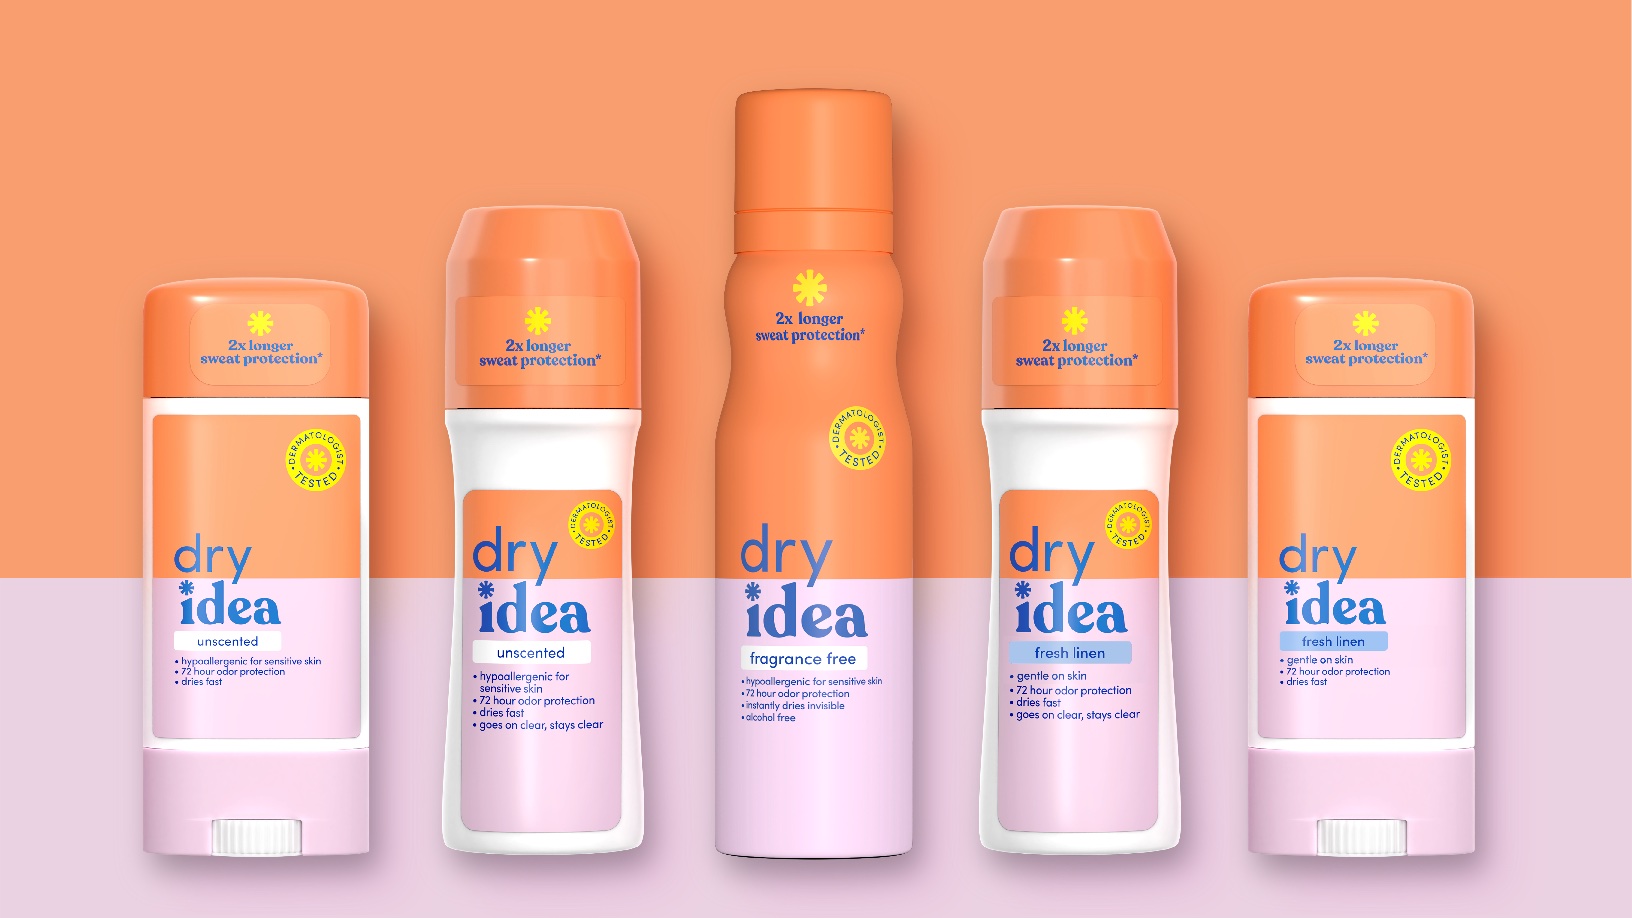 This Ain’t Your Mama’s Antiperspirant: Soulsight Refreshes Dry Idea’s Brand Identity